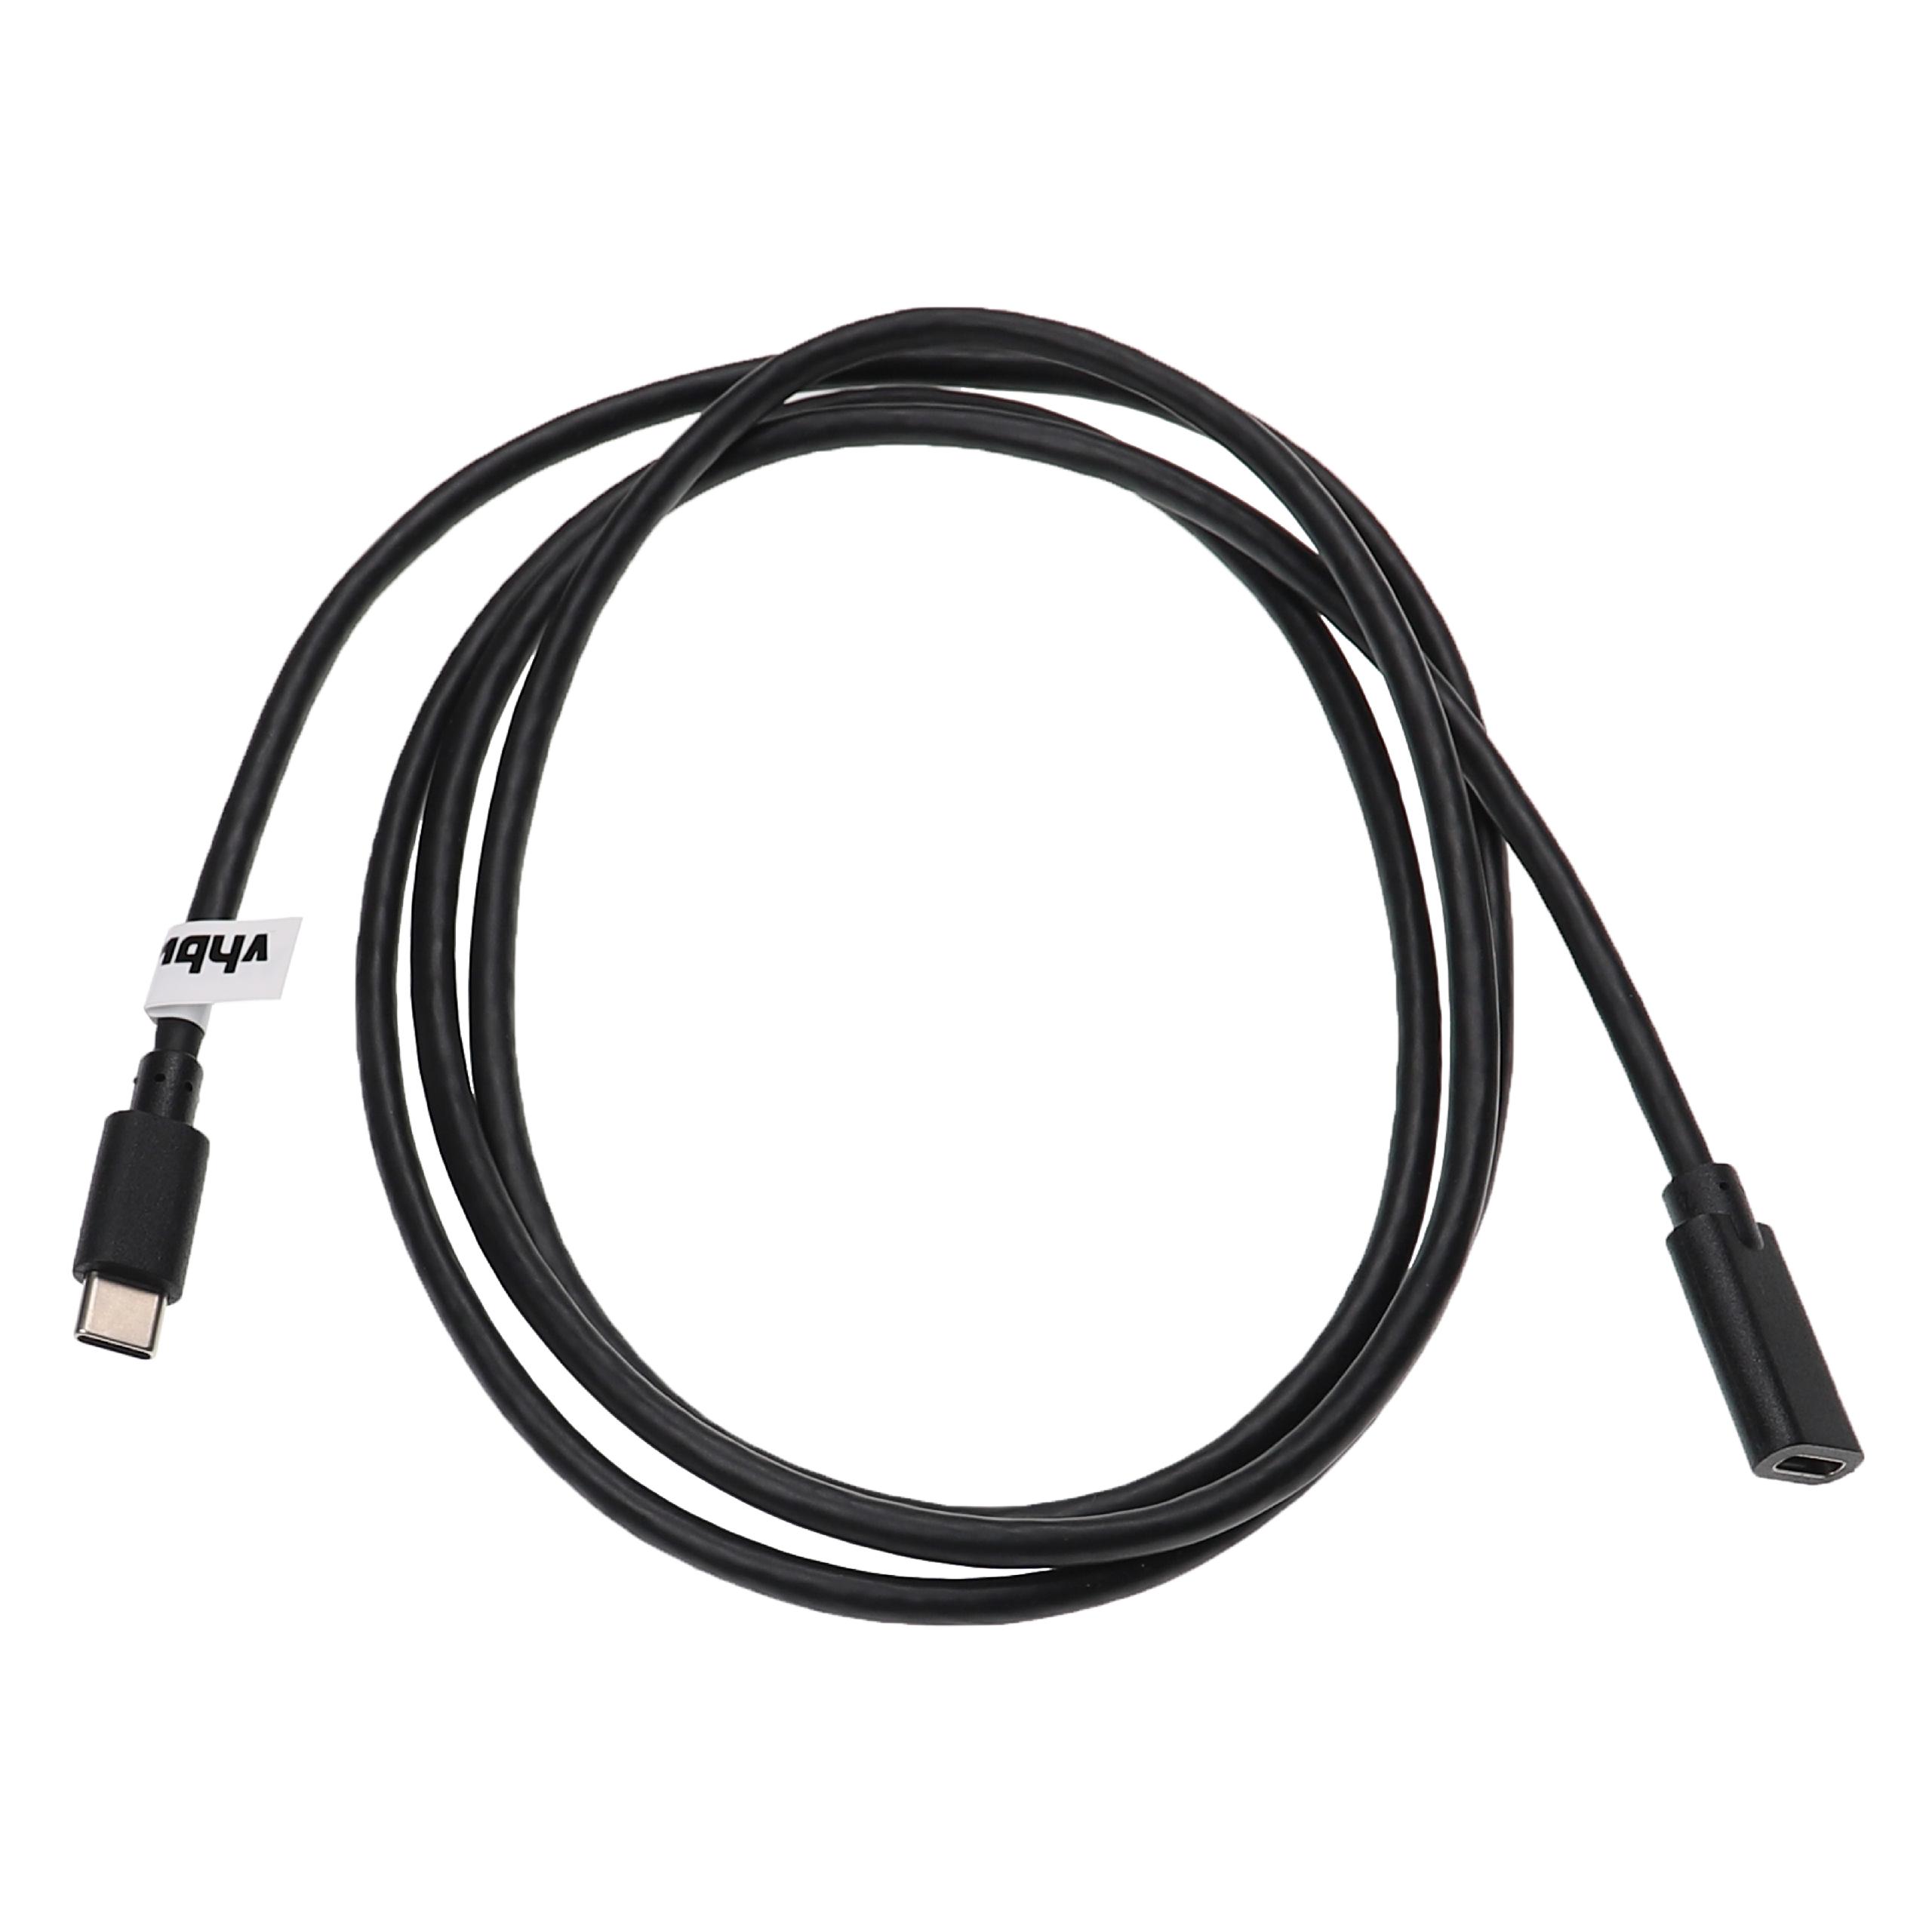 USB C Extension Cable for various Tablets, Notebooks, Smartphones, PCs - 1.5 m Black, USB 3.1 C Cable